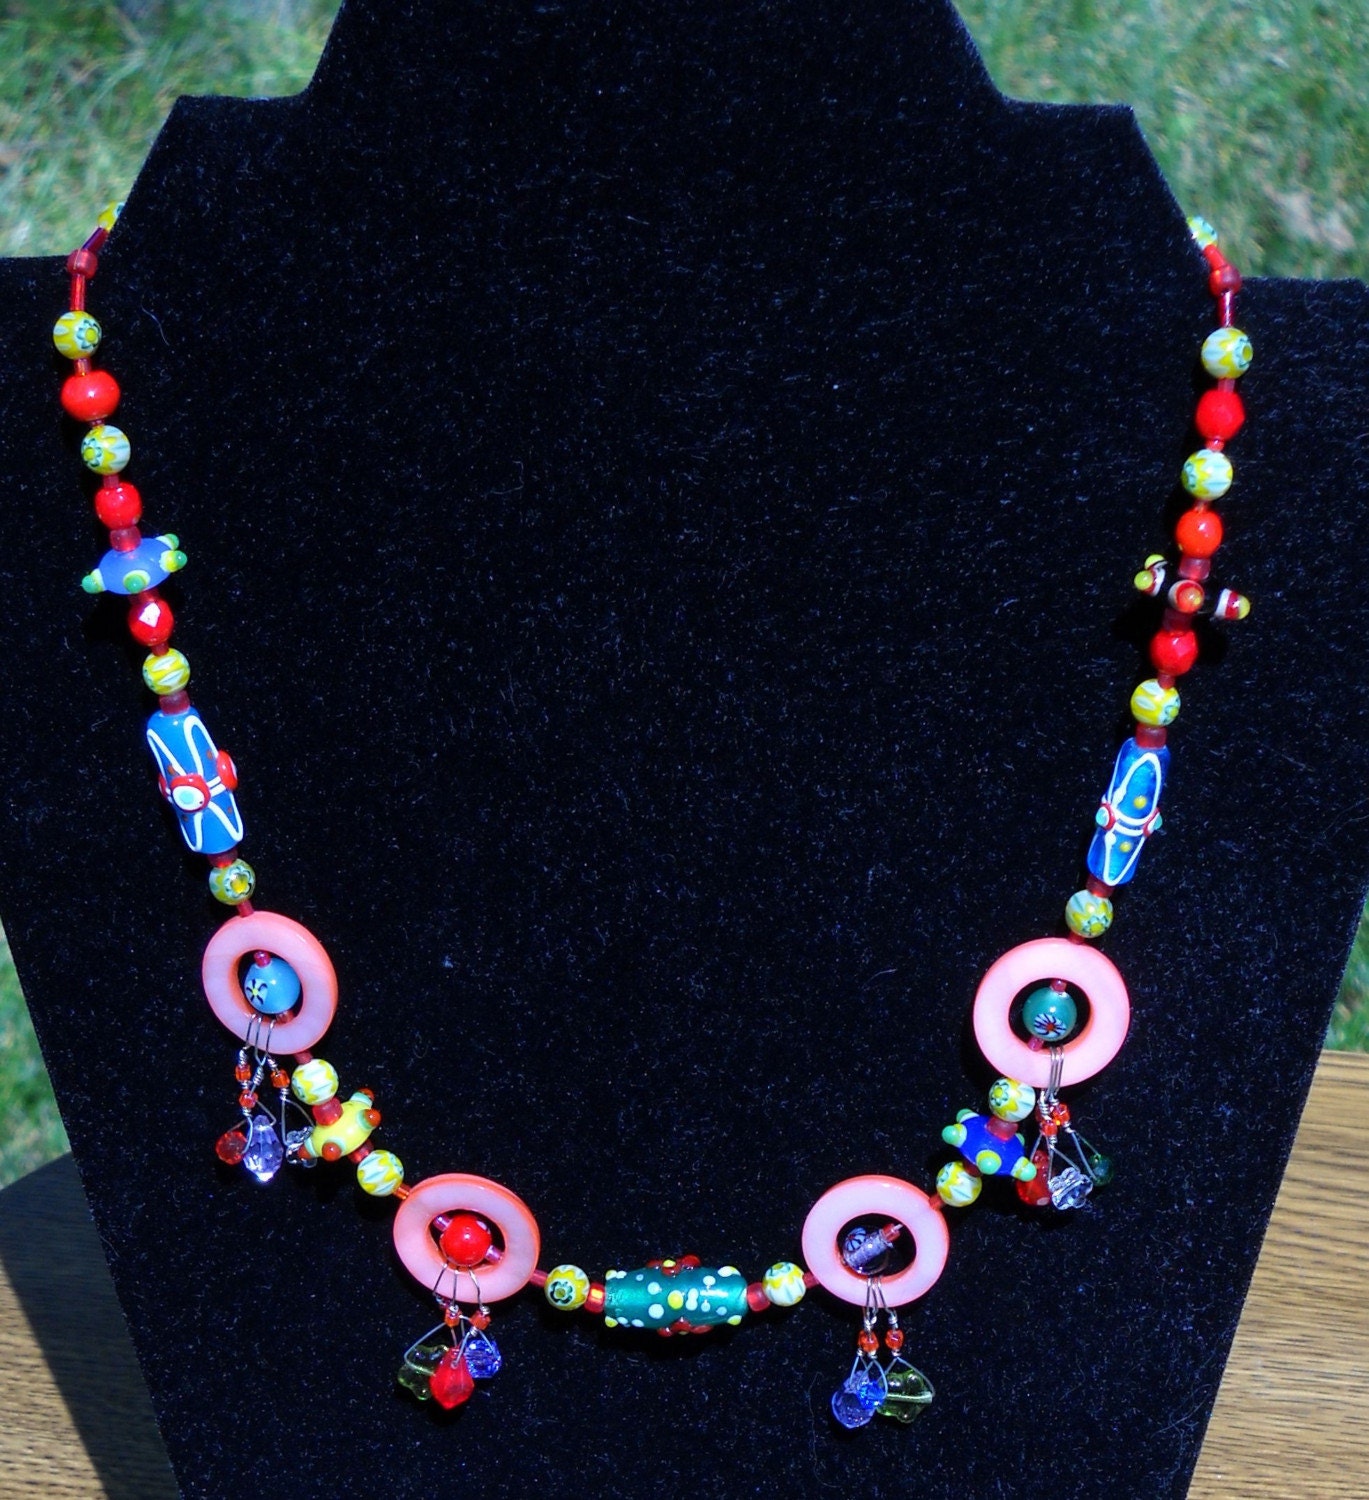 Fiesta 3 Planetary Party Necklace